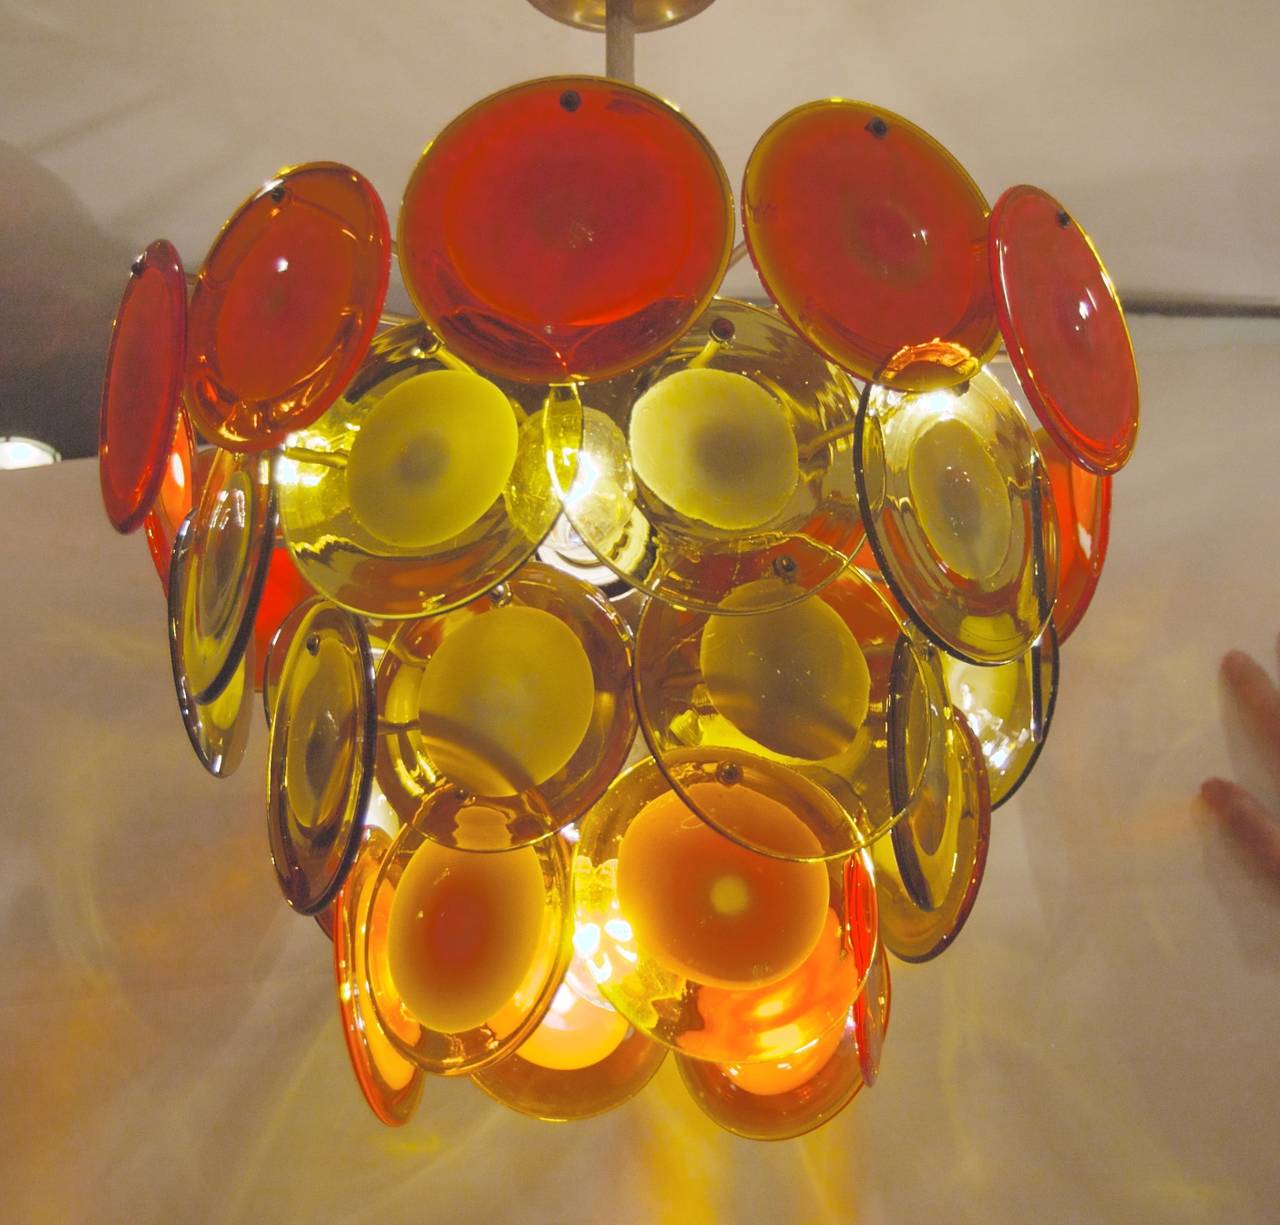 This unique Vistosi chandelier, glass being the preferred screw mounting rather than hooks features four tiers of alternating red or orange and amber or green tone, handblown glass discs on a brass fixture. The top tier of 12 discs is a strong red,